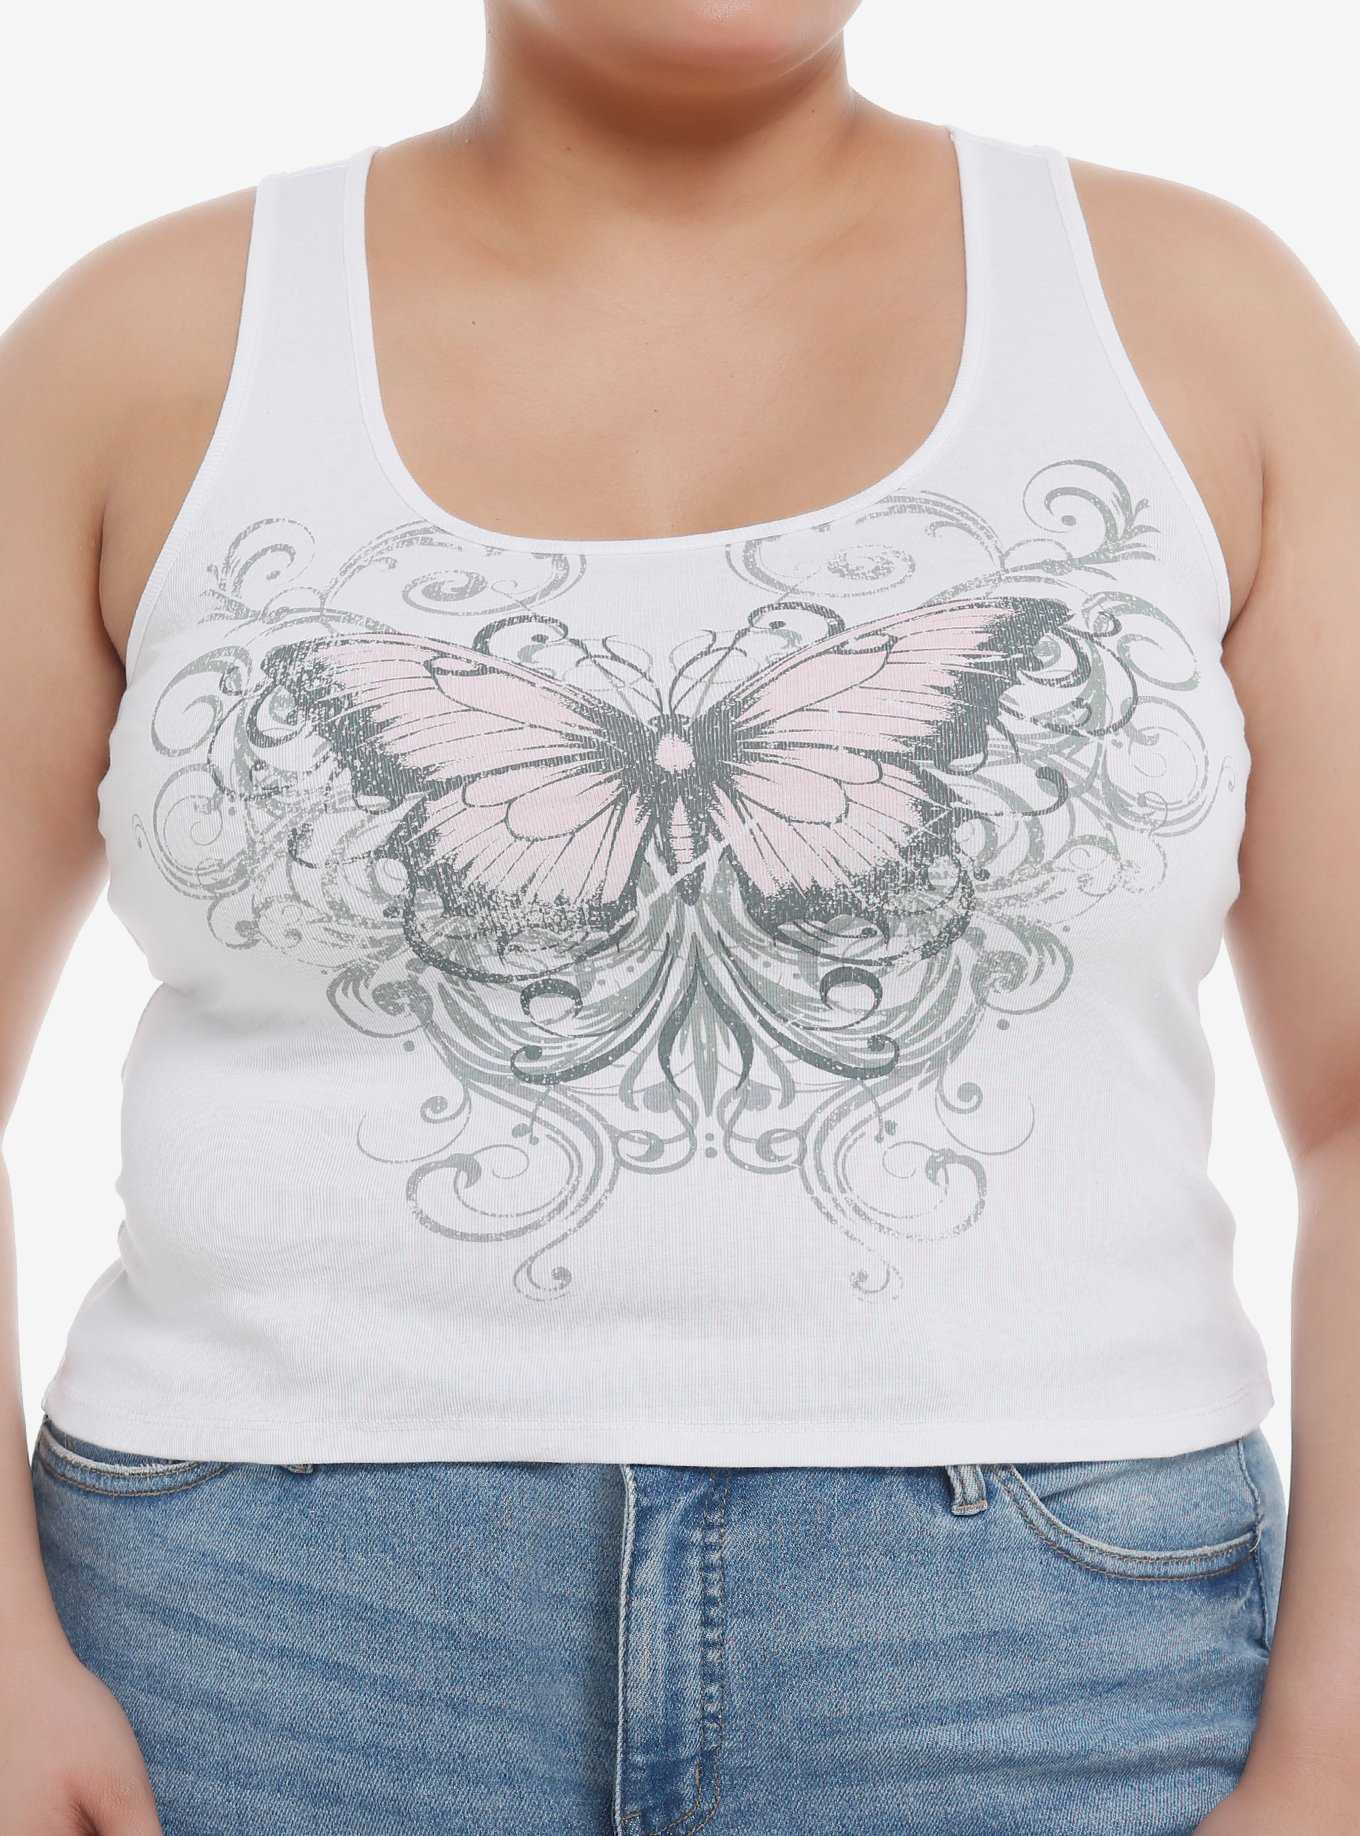 Social Collision® Butterfly Filigree Girls Tank Top Plus Size, , hi-res